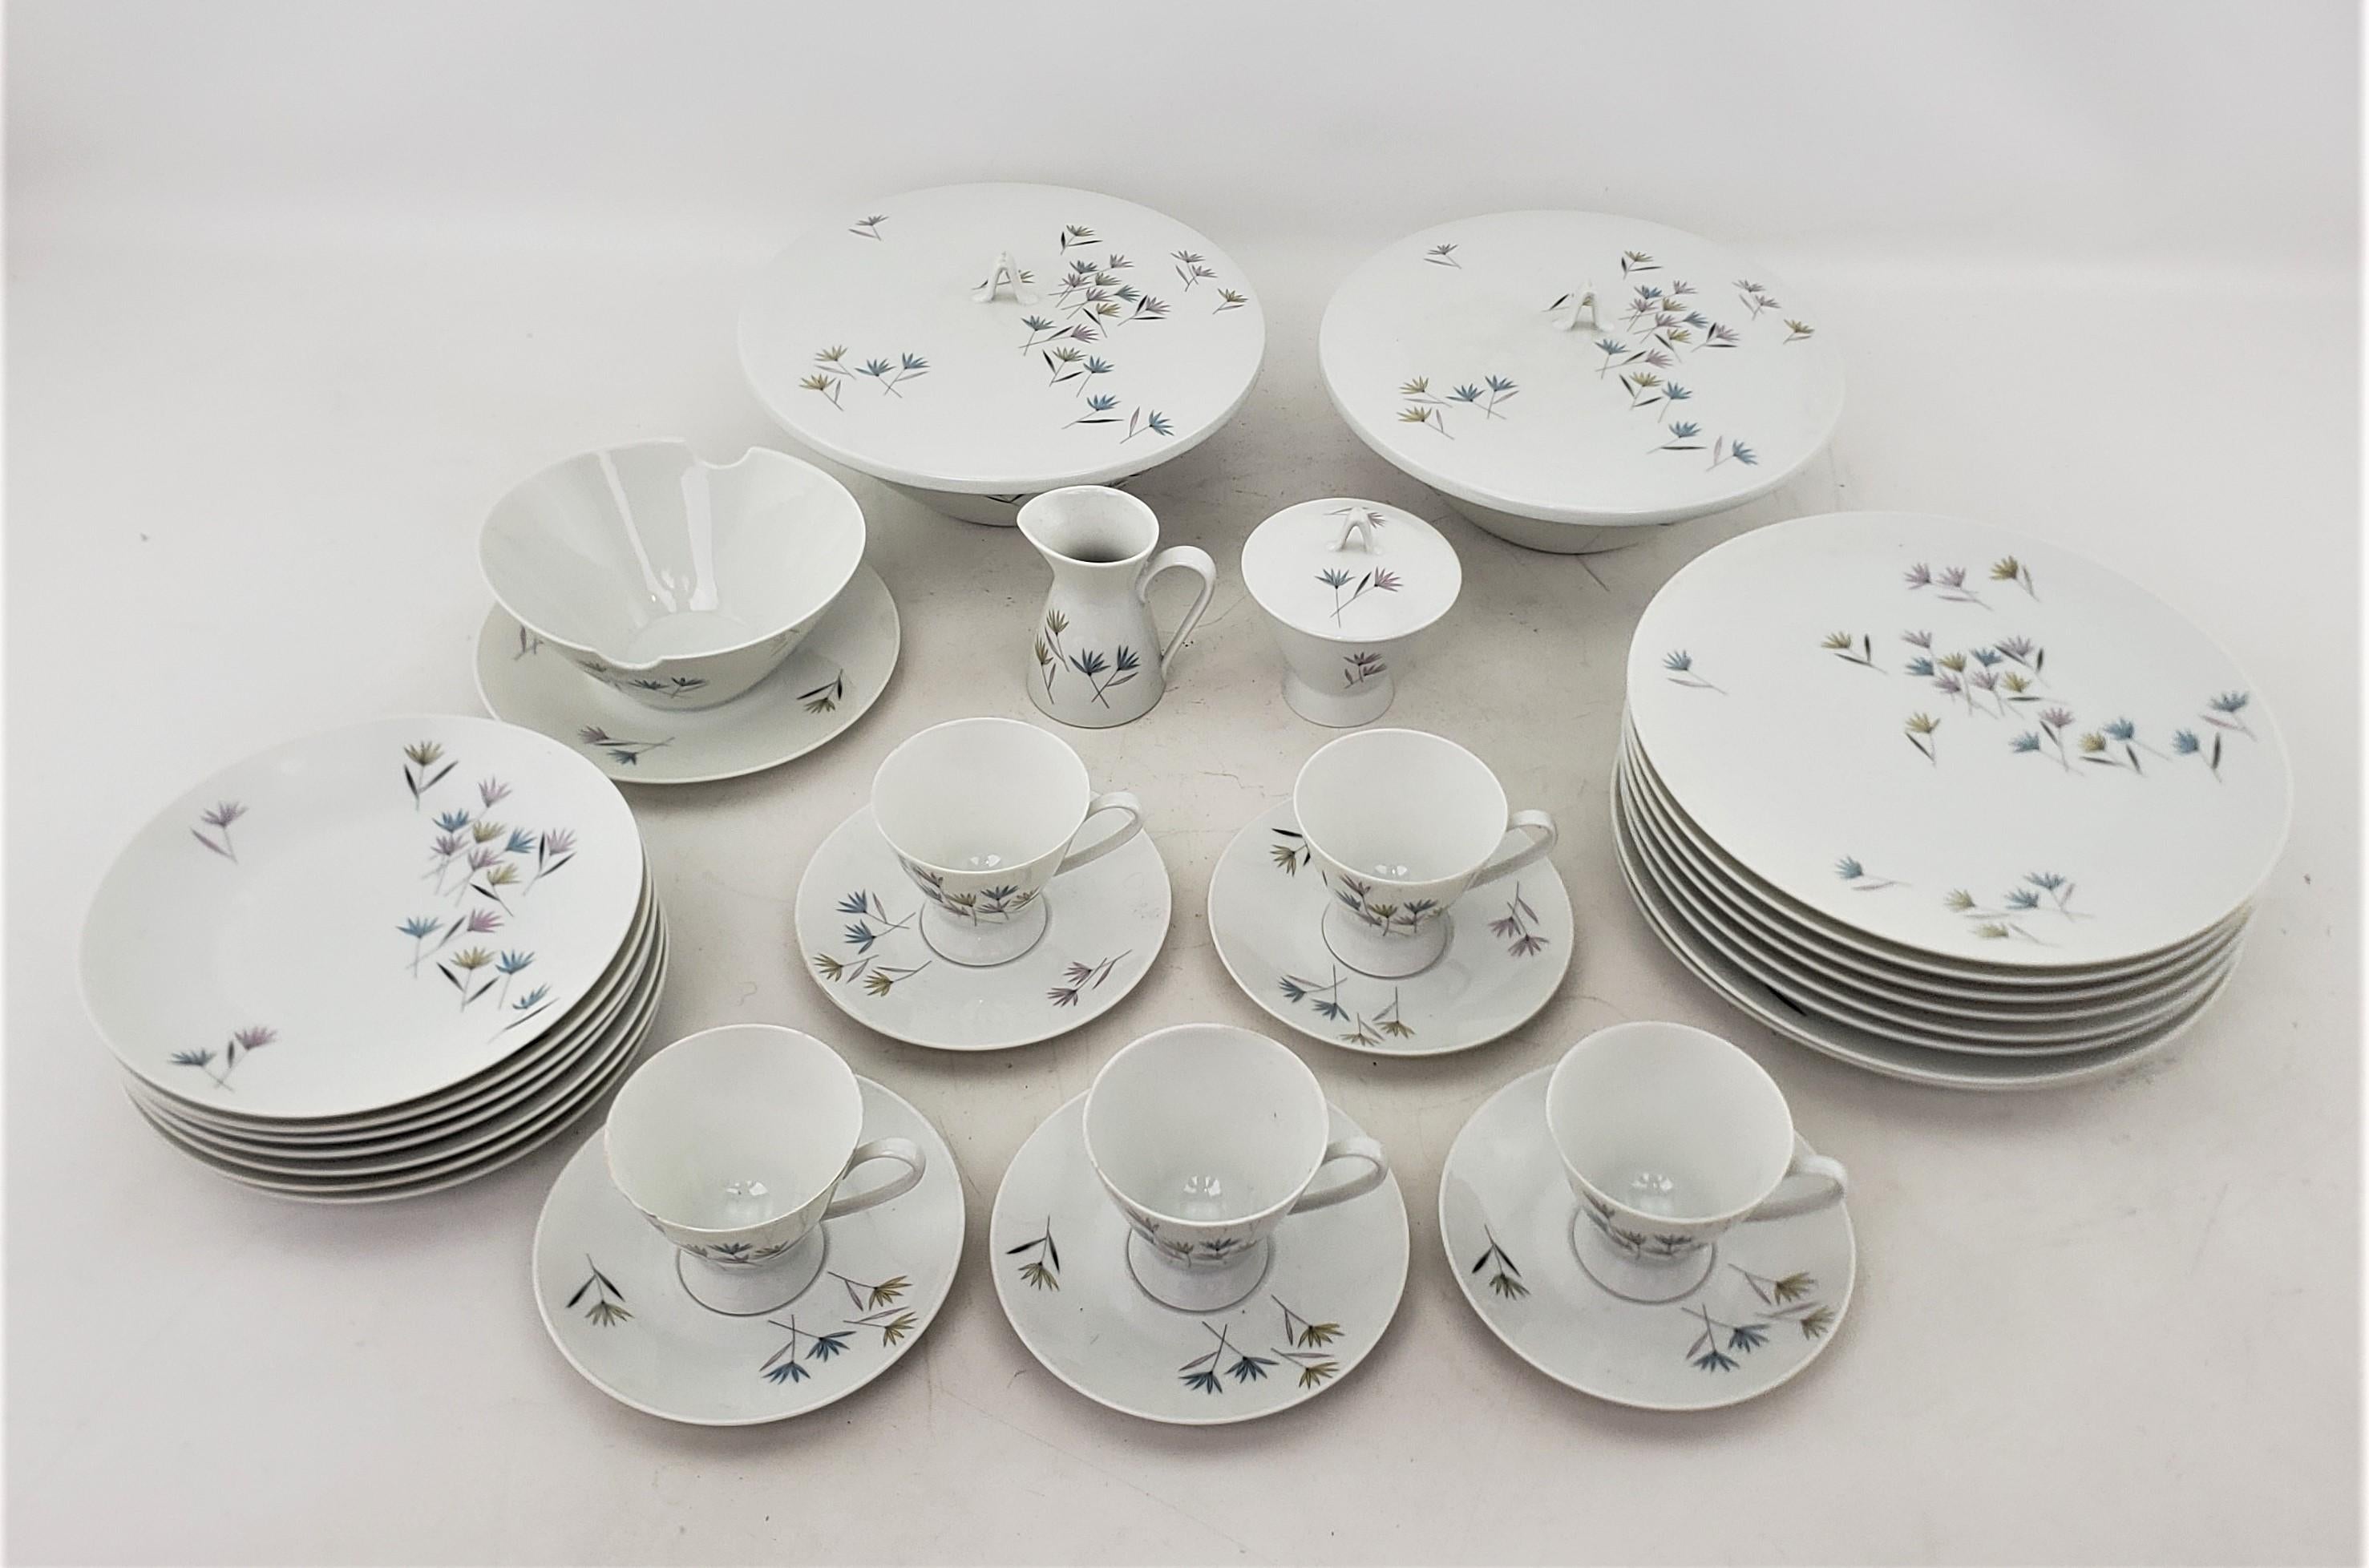 This partial dinner ware set was made by the well known Rosenthal factory of Germany in approximately 1970 in the period Mid-Century Modern style. The pattern is known as Form 2000 and was designed by Raymond Loewy, each piece having an organic